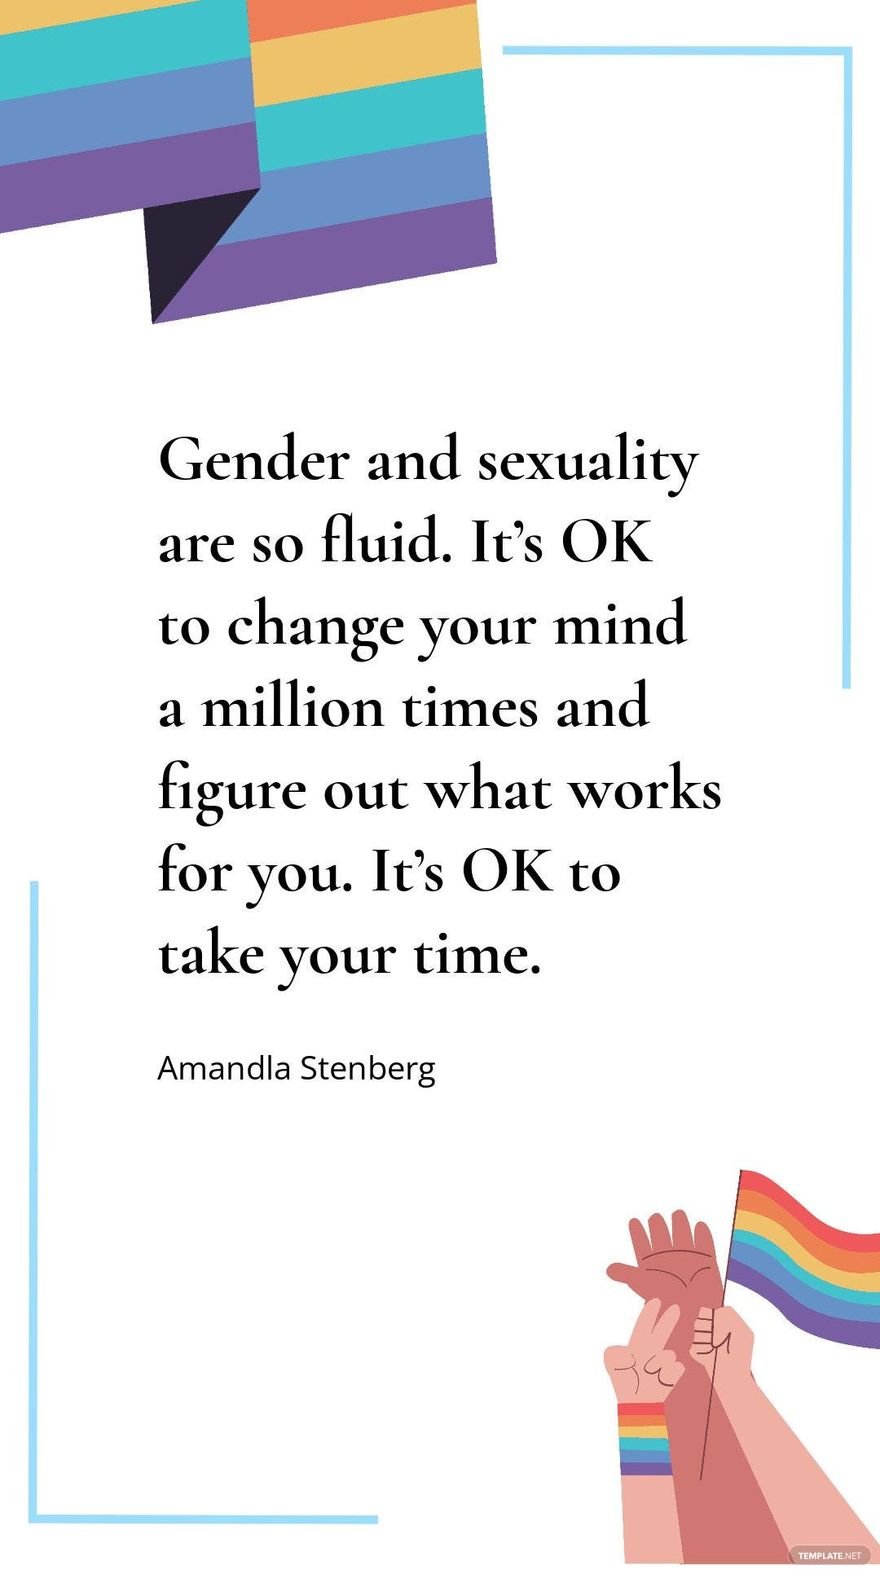 Amandla Stenberg - Gender and sexuality are so fluid. It’s OK to change your mind a million times and figure out what works for you. It’s OK to take your time.